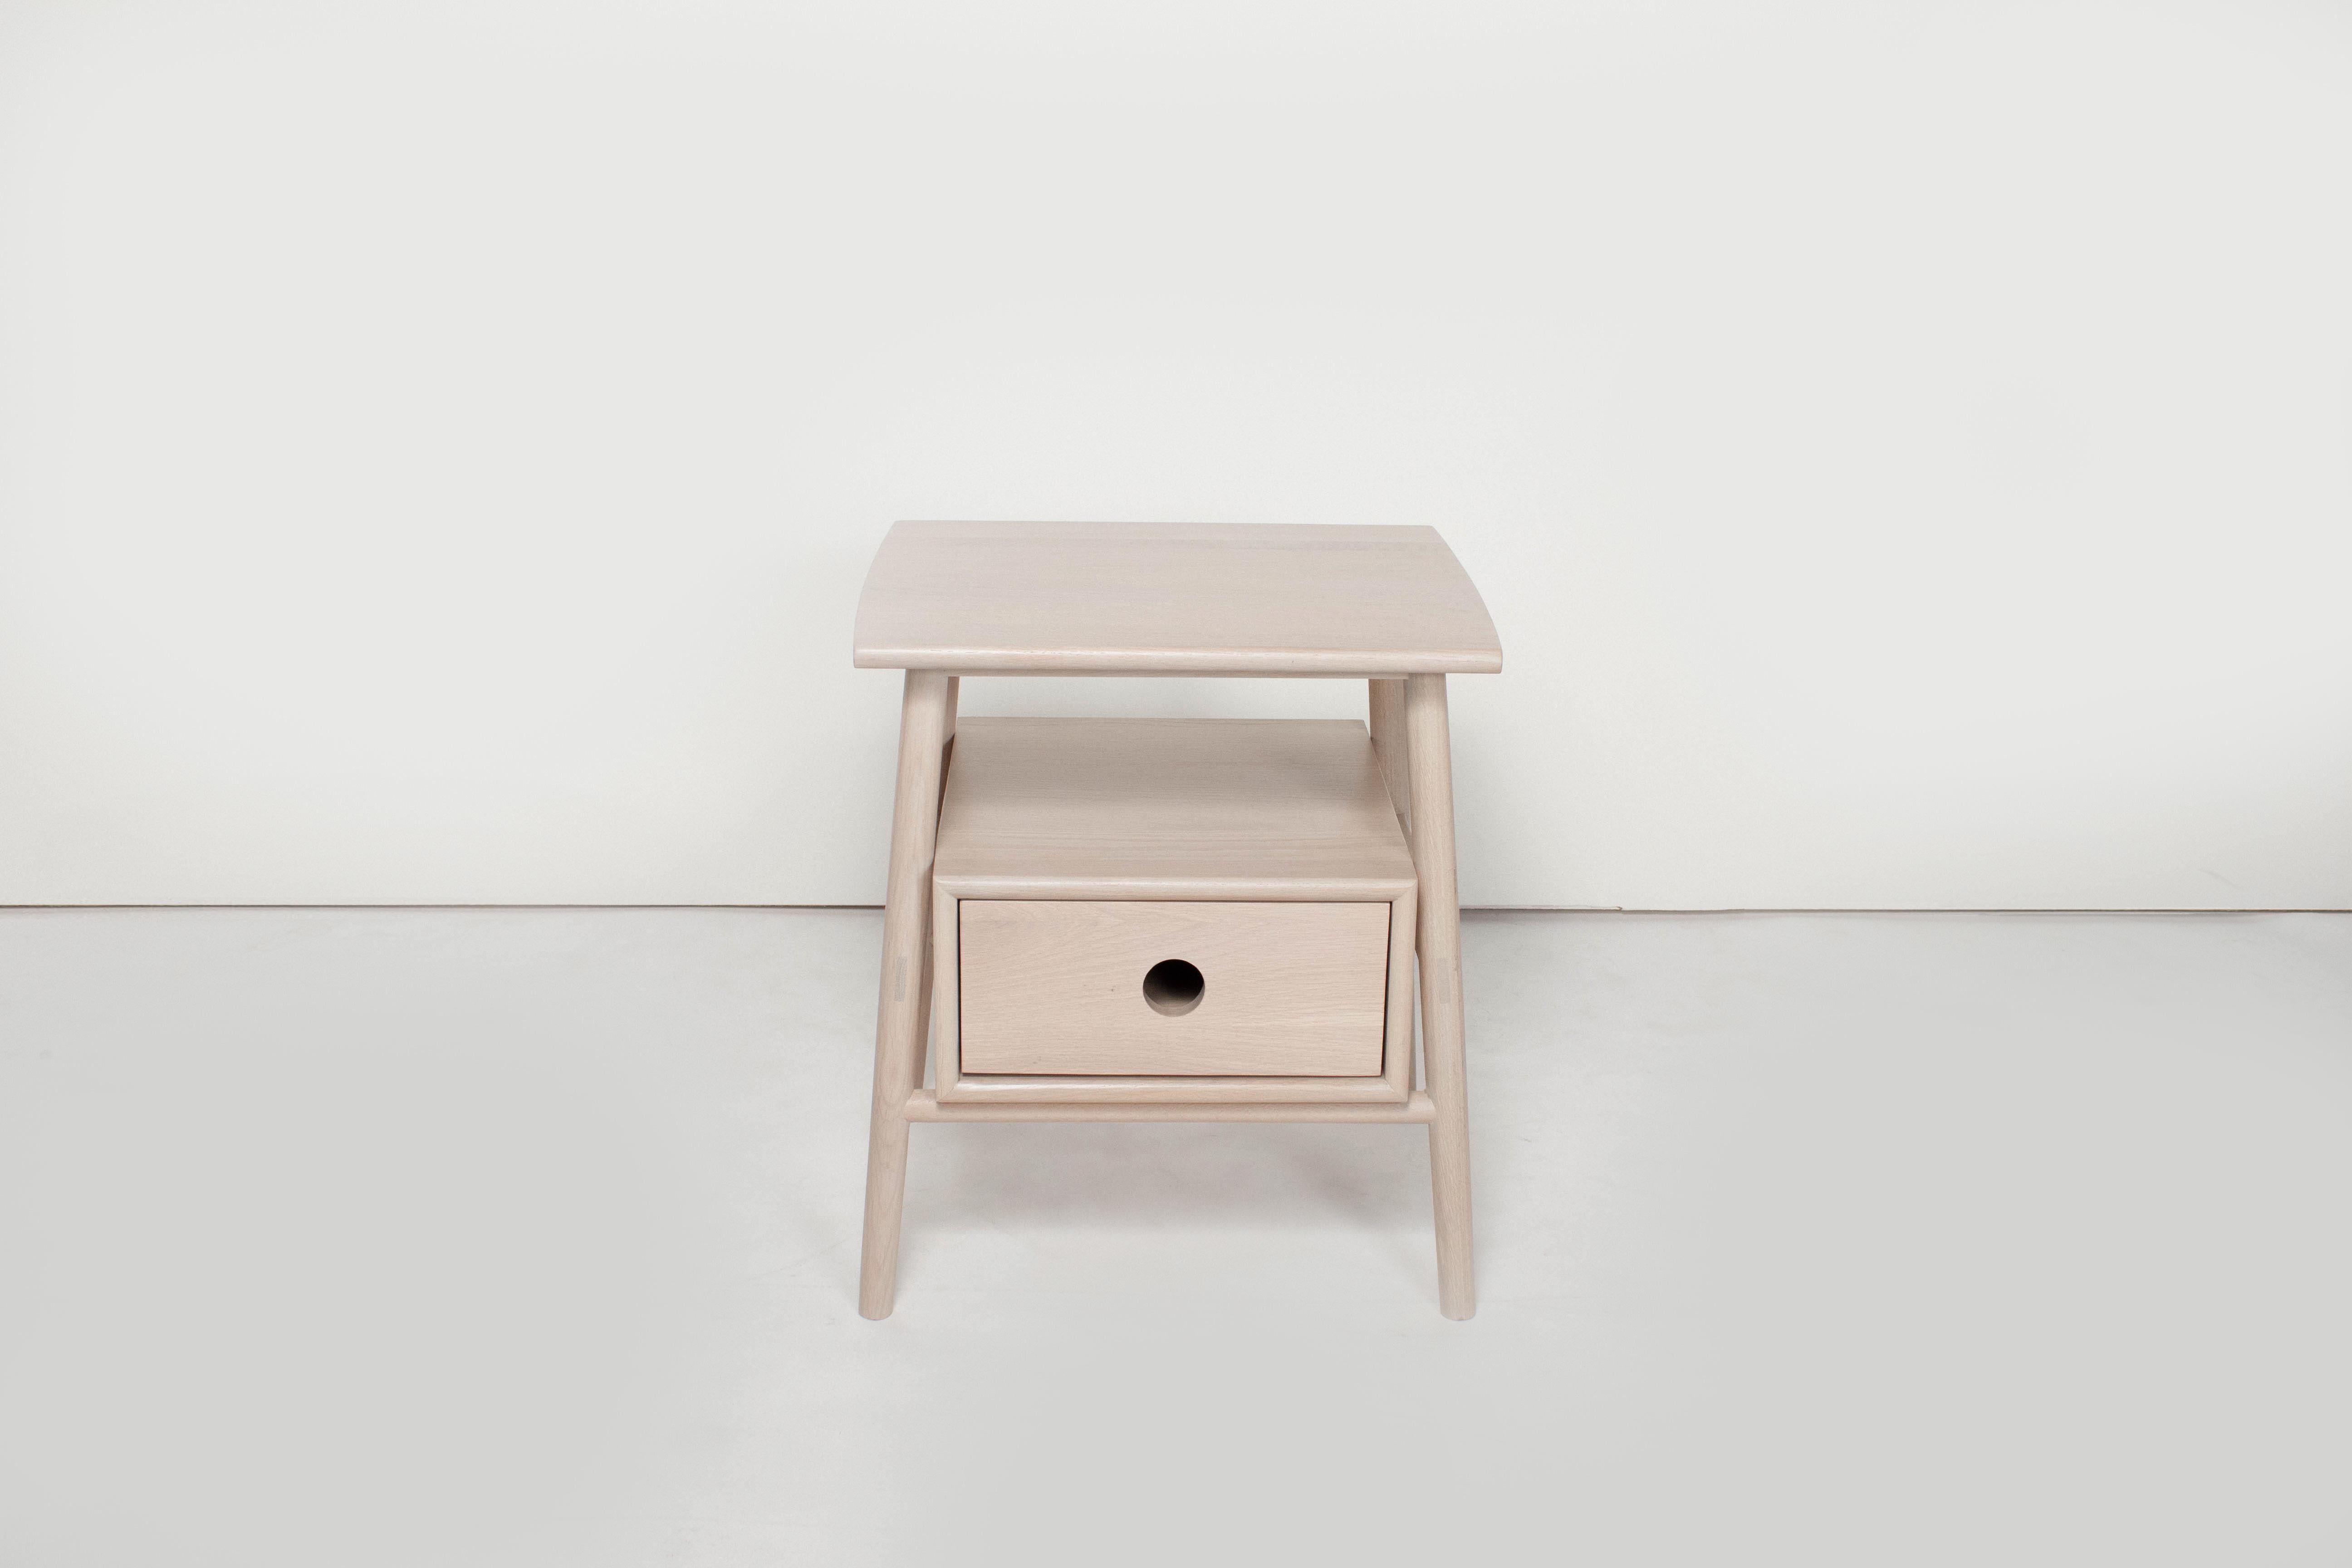 Sun at Six is a contemporary furniture design studio that works with traditional Chinese joinery masters to handcraft our pieces using traditional joinery. The Sitka side table features traditional joinery throughout.

Great furniture begins with